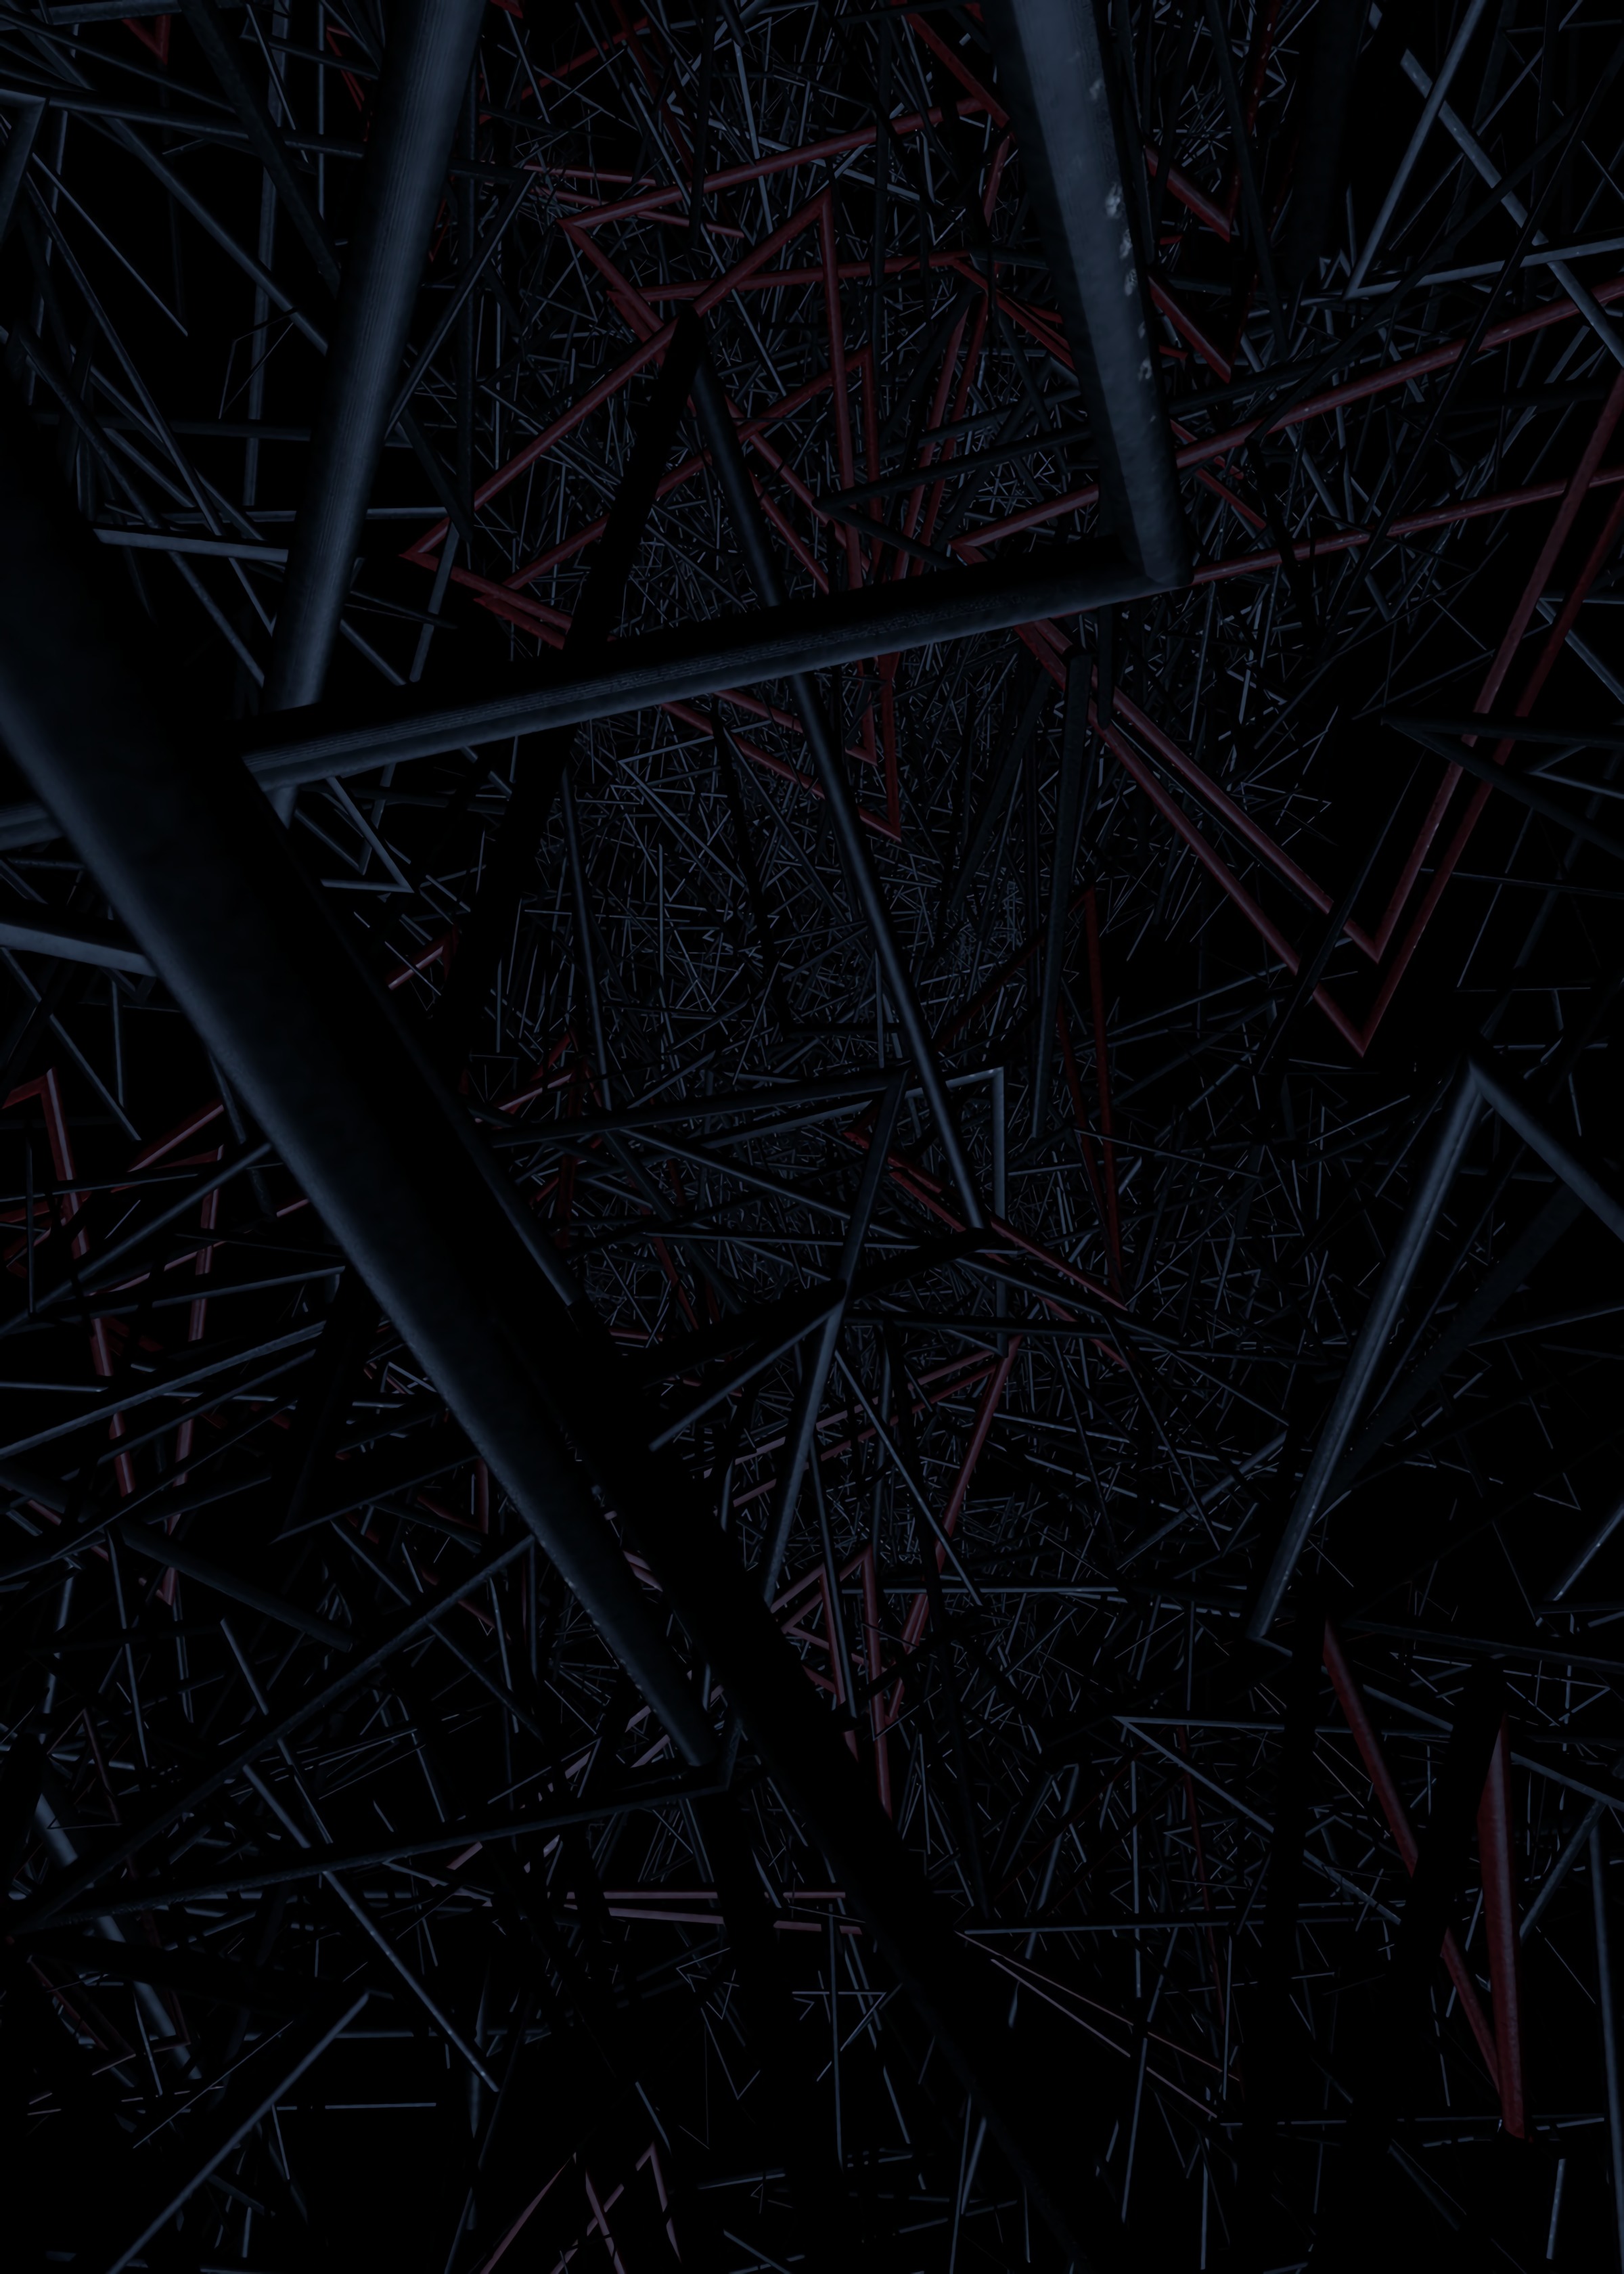 dark, intricate, confused, black, structure, weave, endless, pipes, tubing 2160p